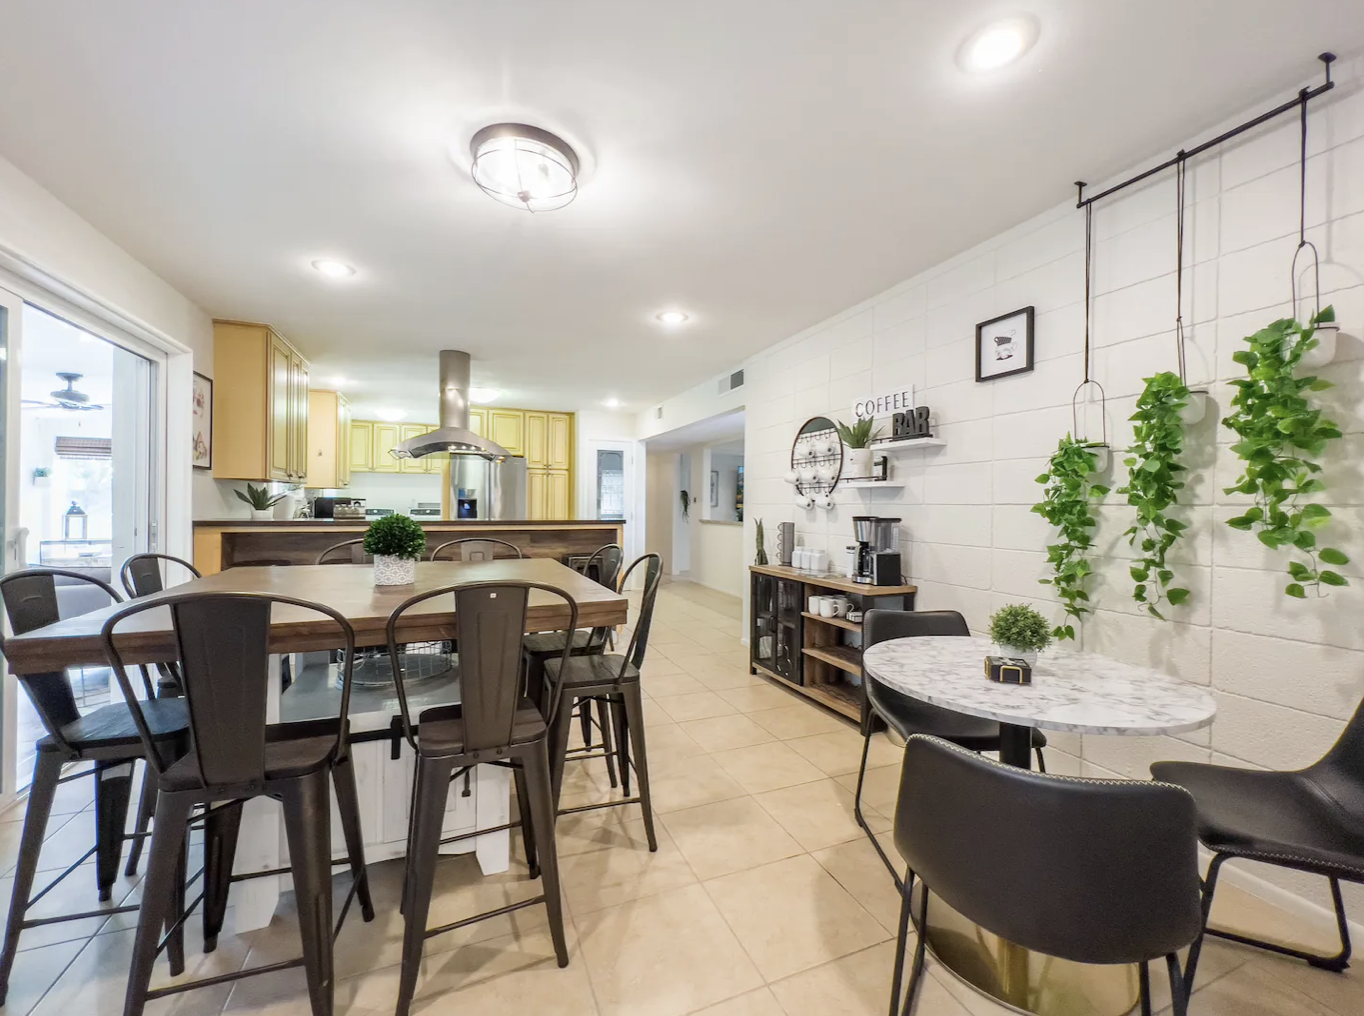 Bright open kitchen and dining combo with a coffee bar and breakfast nook